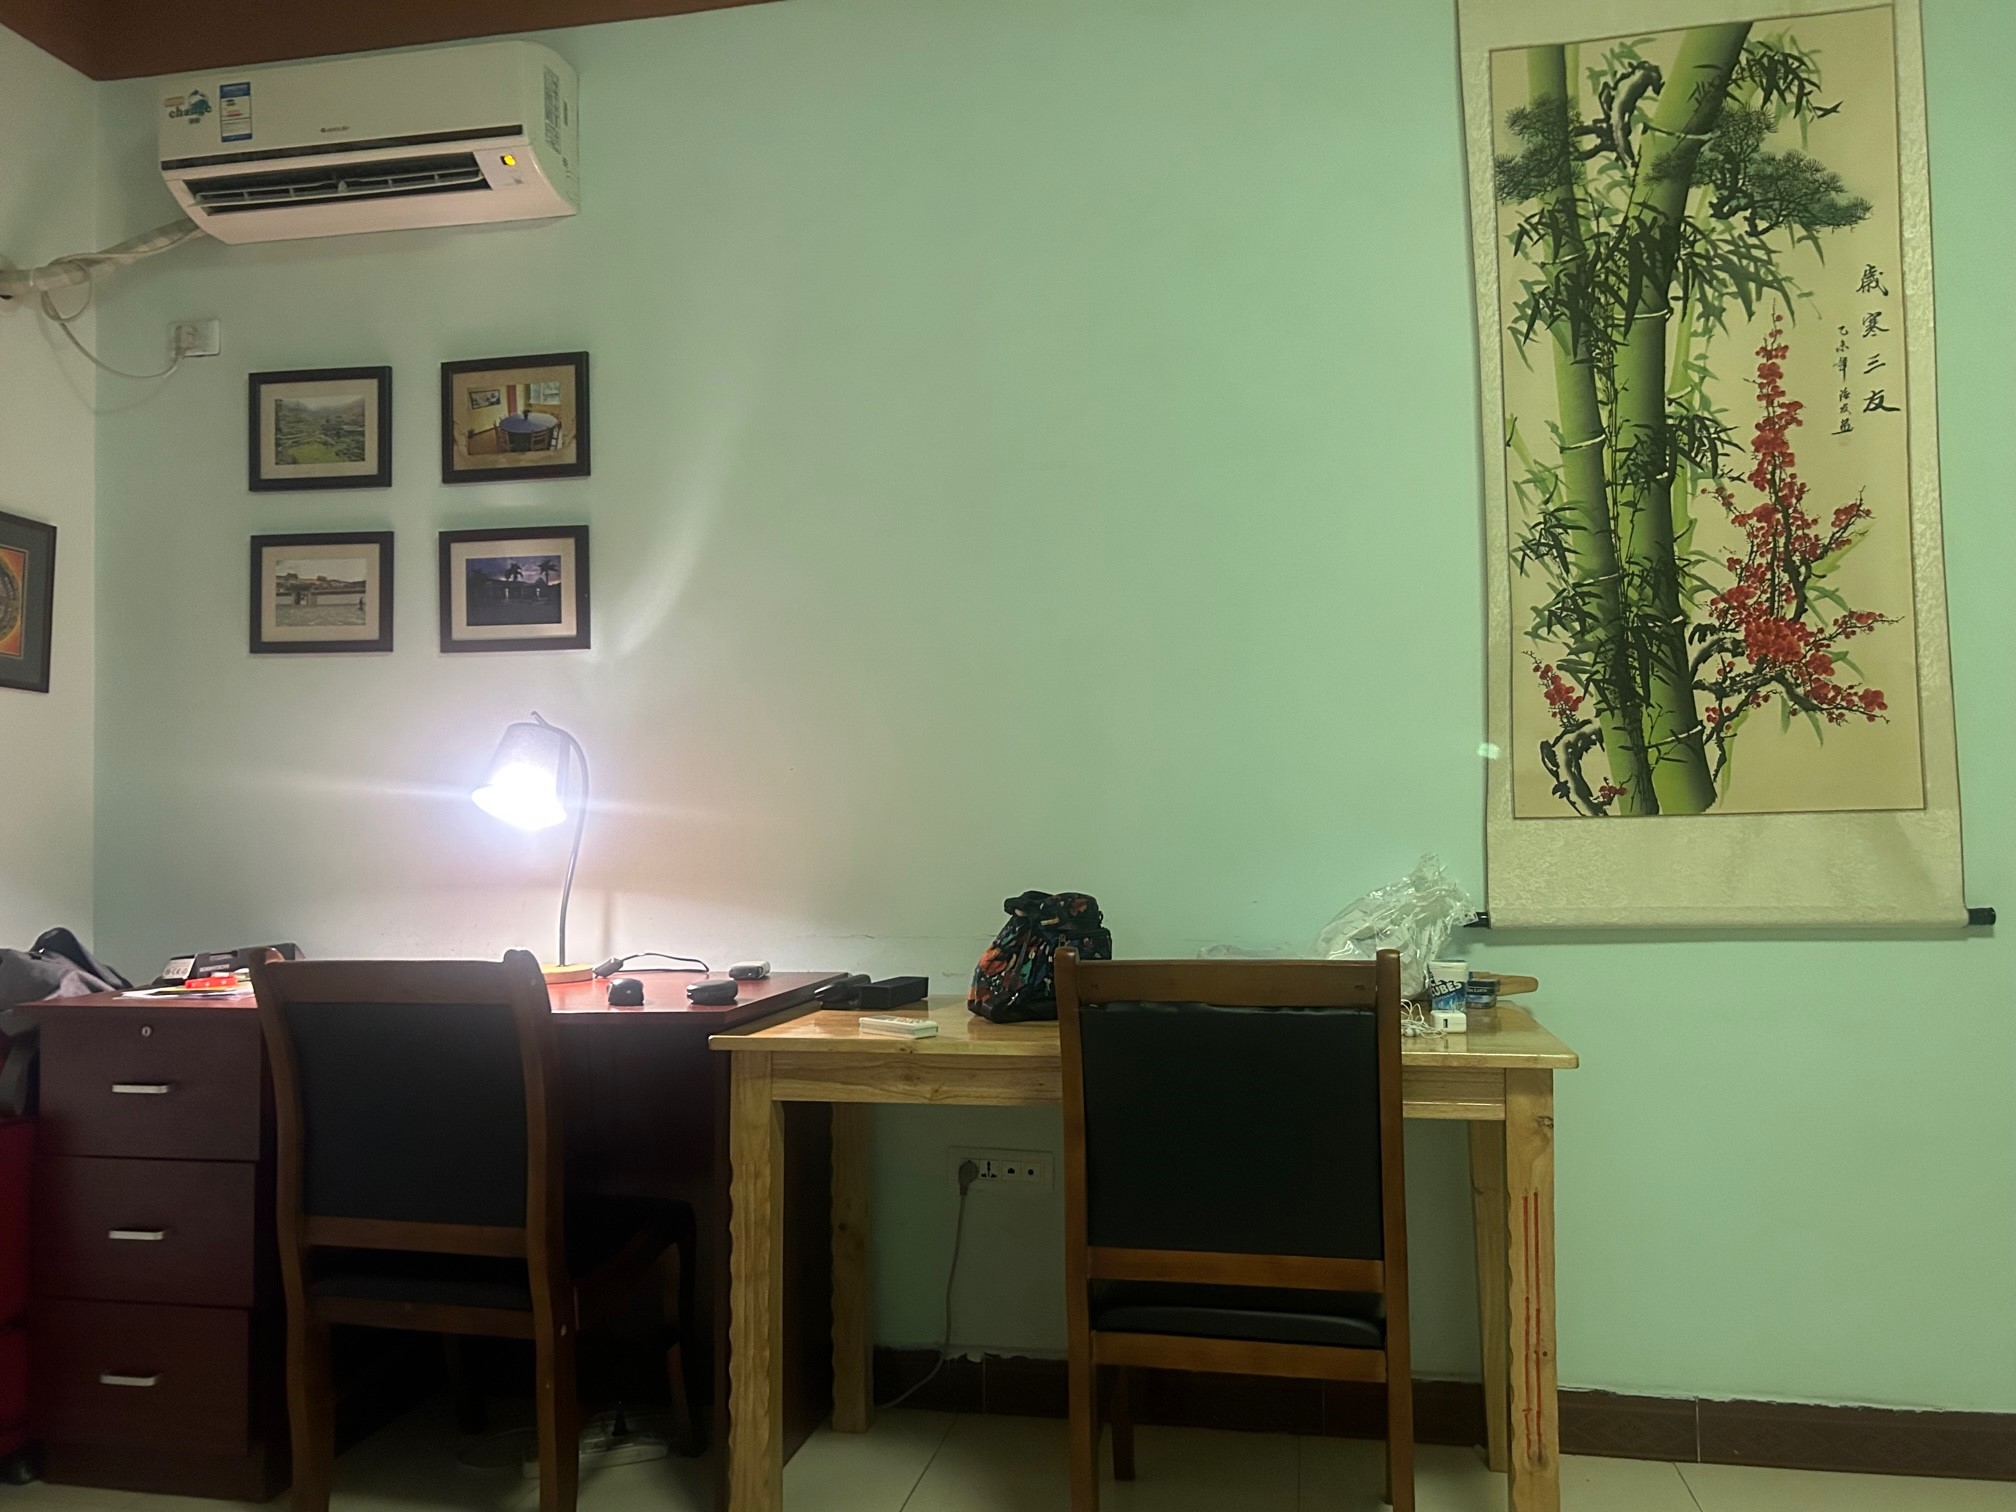 Another view of my room's study area